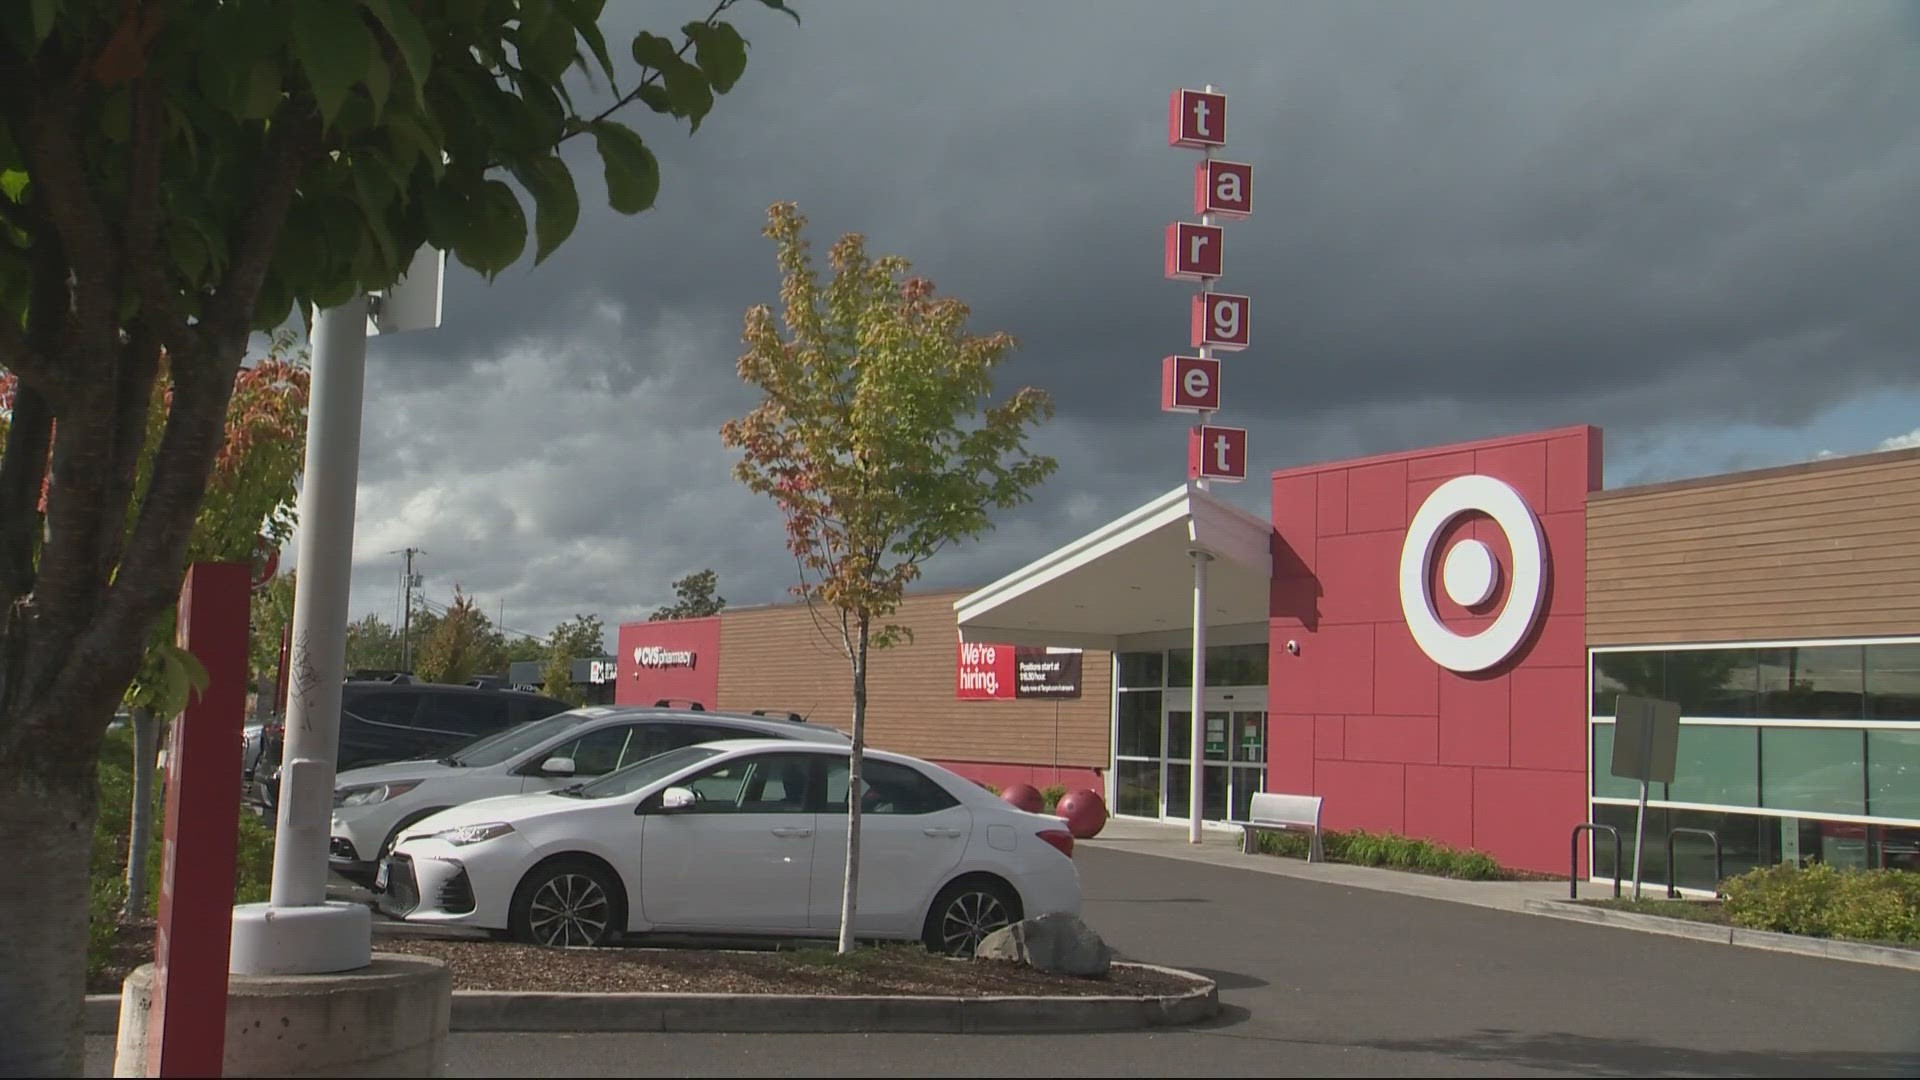 Target announced that it's closing nine locations across the U.S. effective Oct. 21, including the Portland Galleria, Powell and Hollywood stores.